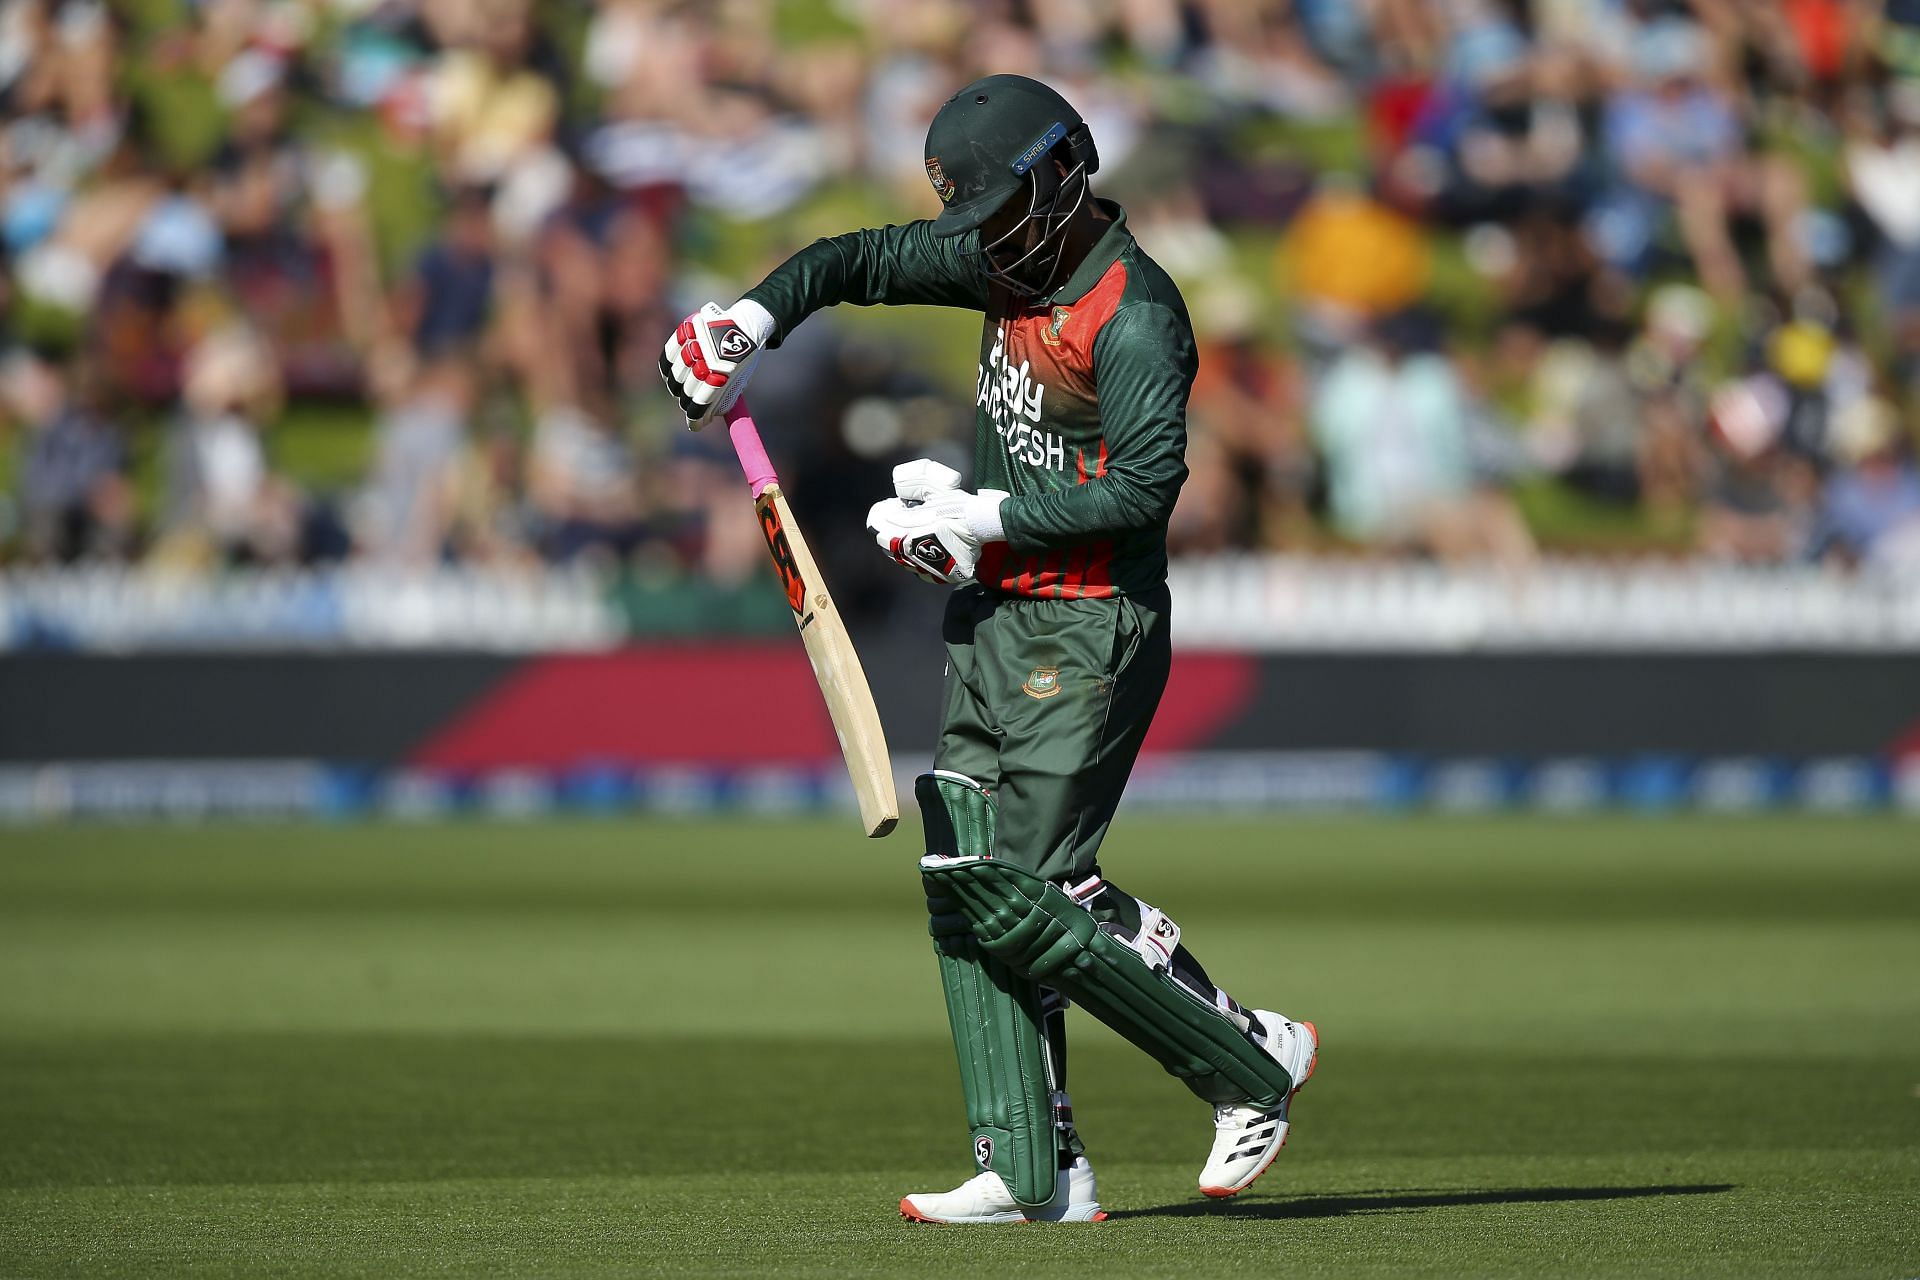 Bangladesh will hope to bounce back from a disappointing T20 series